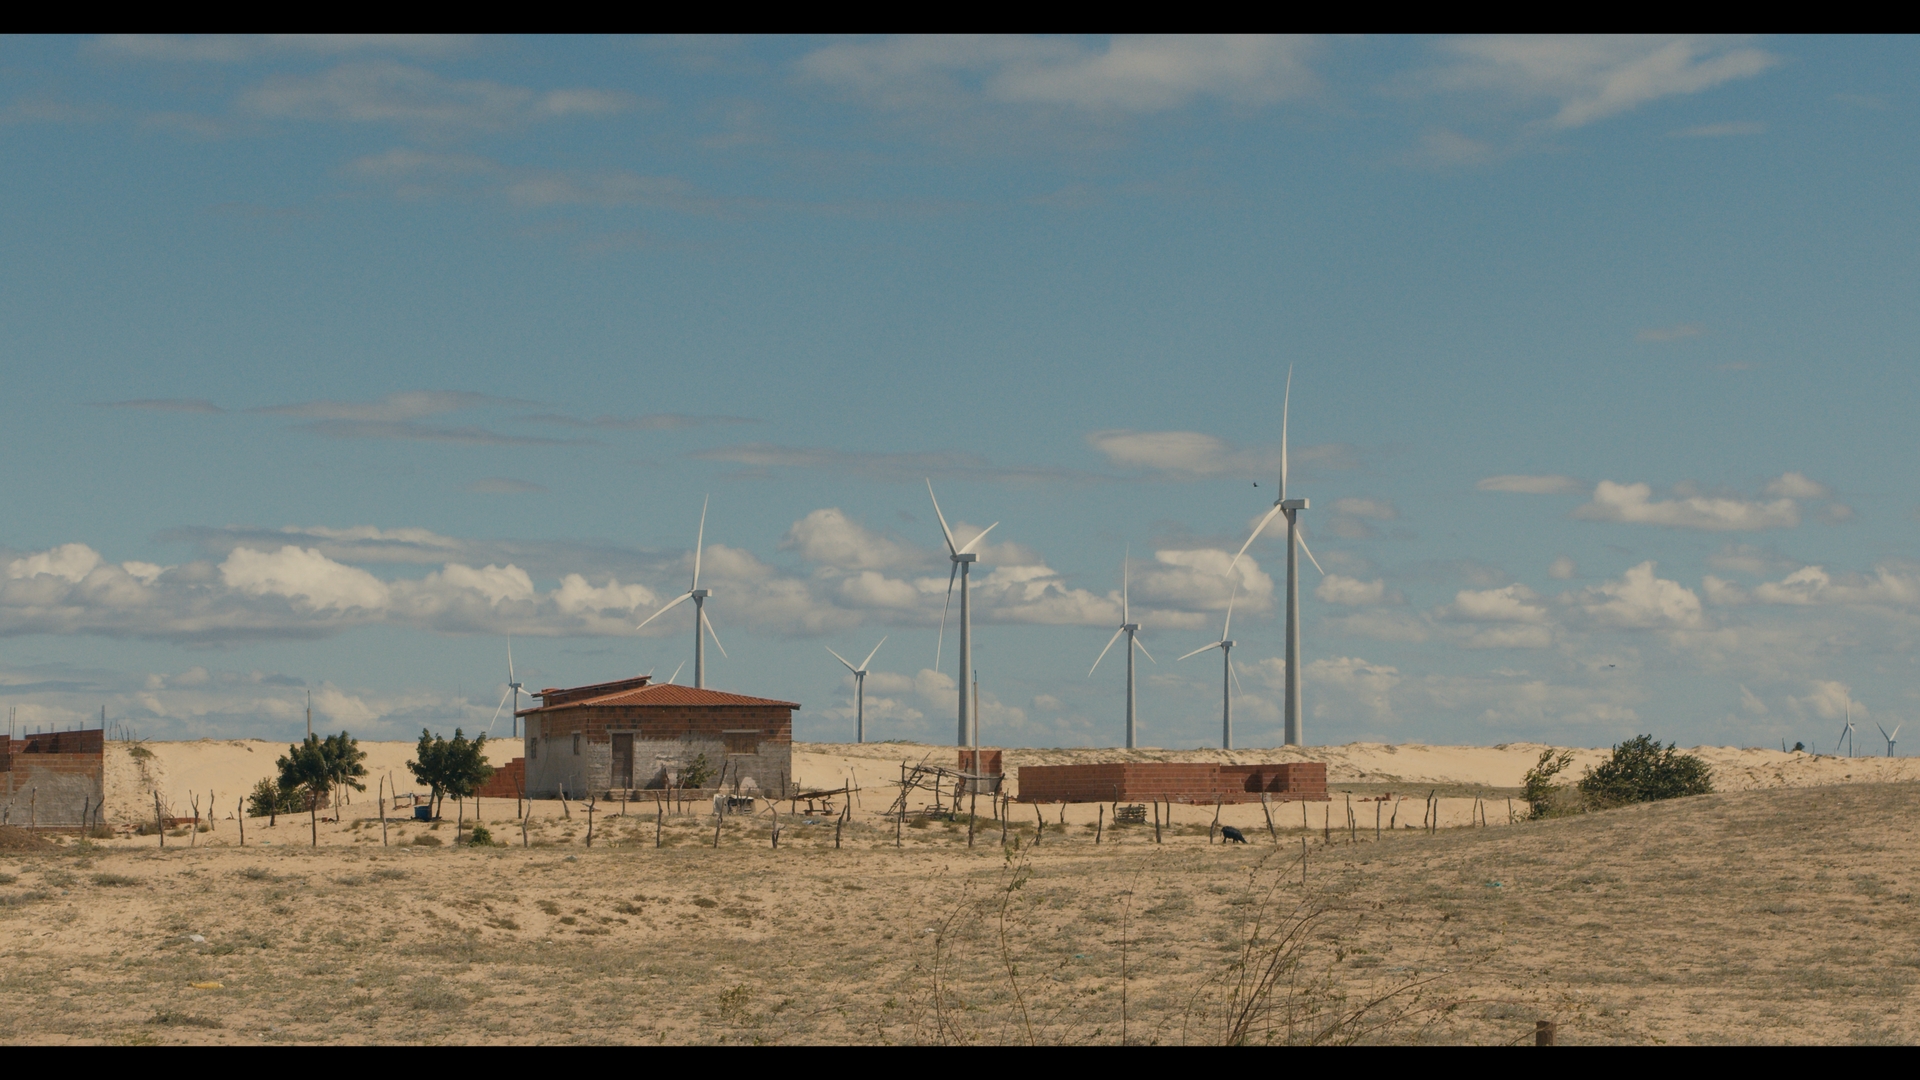 A wind farm sits on the arid landscape of Rio Grande do Norte. According to Gustavo Freire Barbosa, a lawyer specializing in constitutional law, it was built in contravention of the Indigenous and Tribal Peoples Convention, 1989 (ILO 169), which Brazil ratified in 2002.